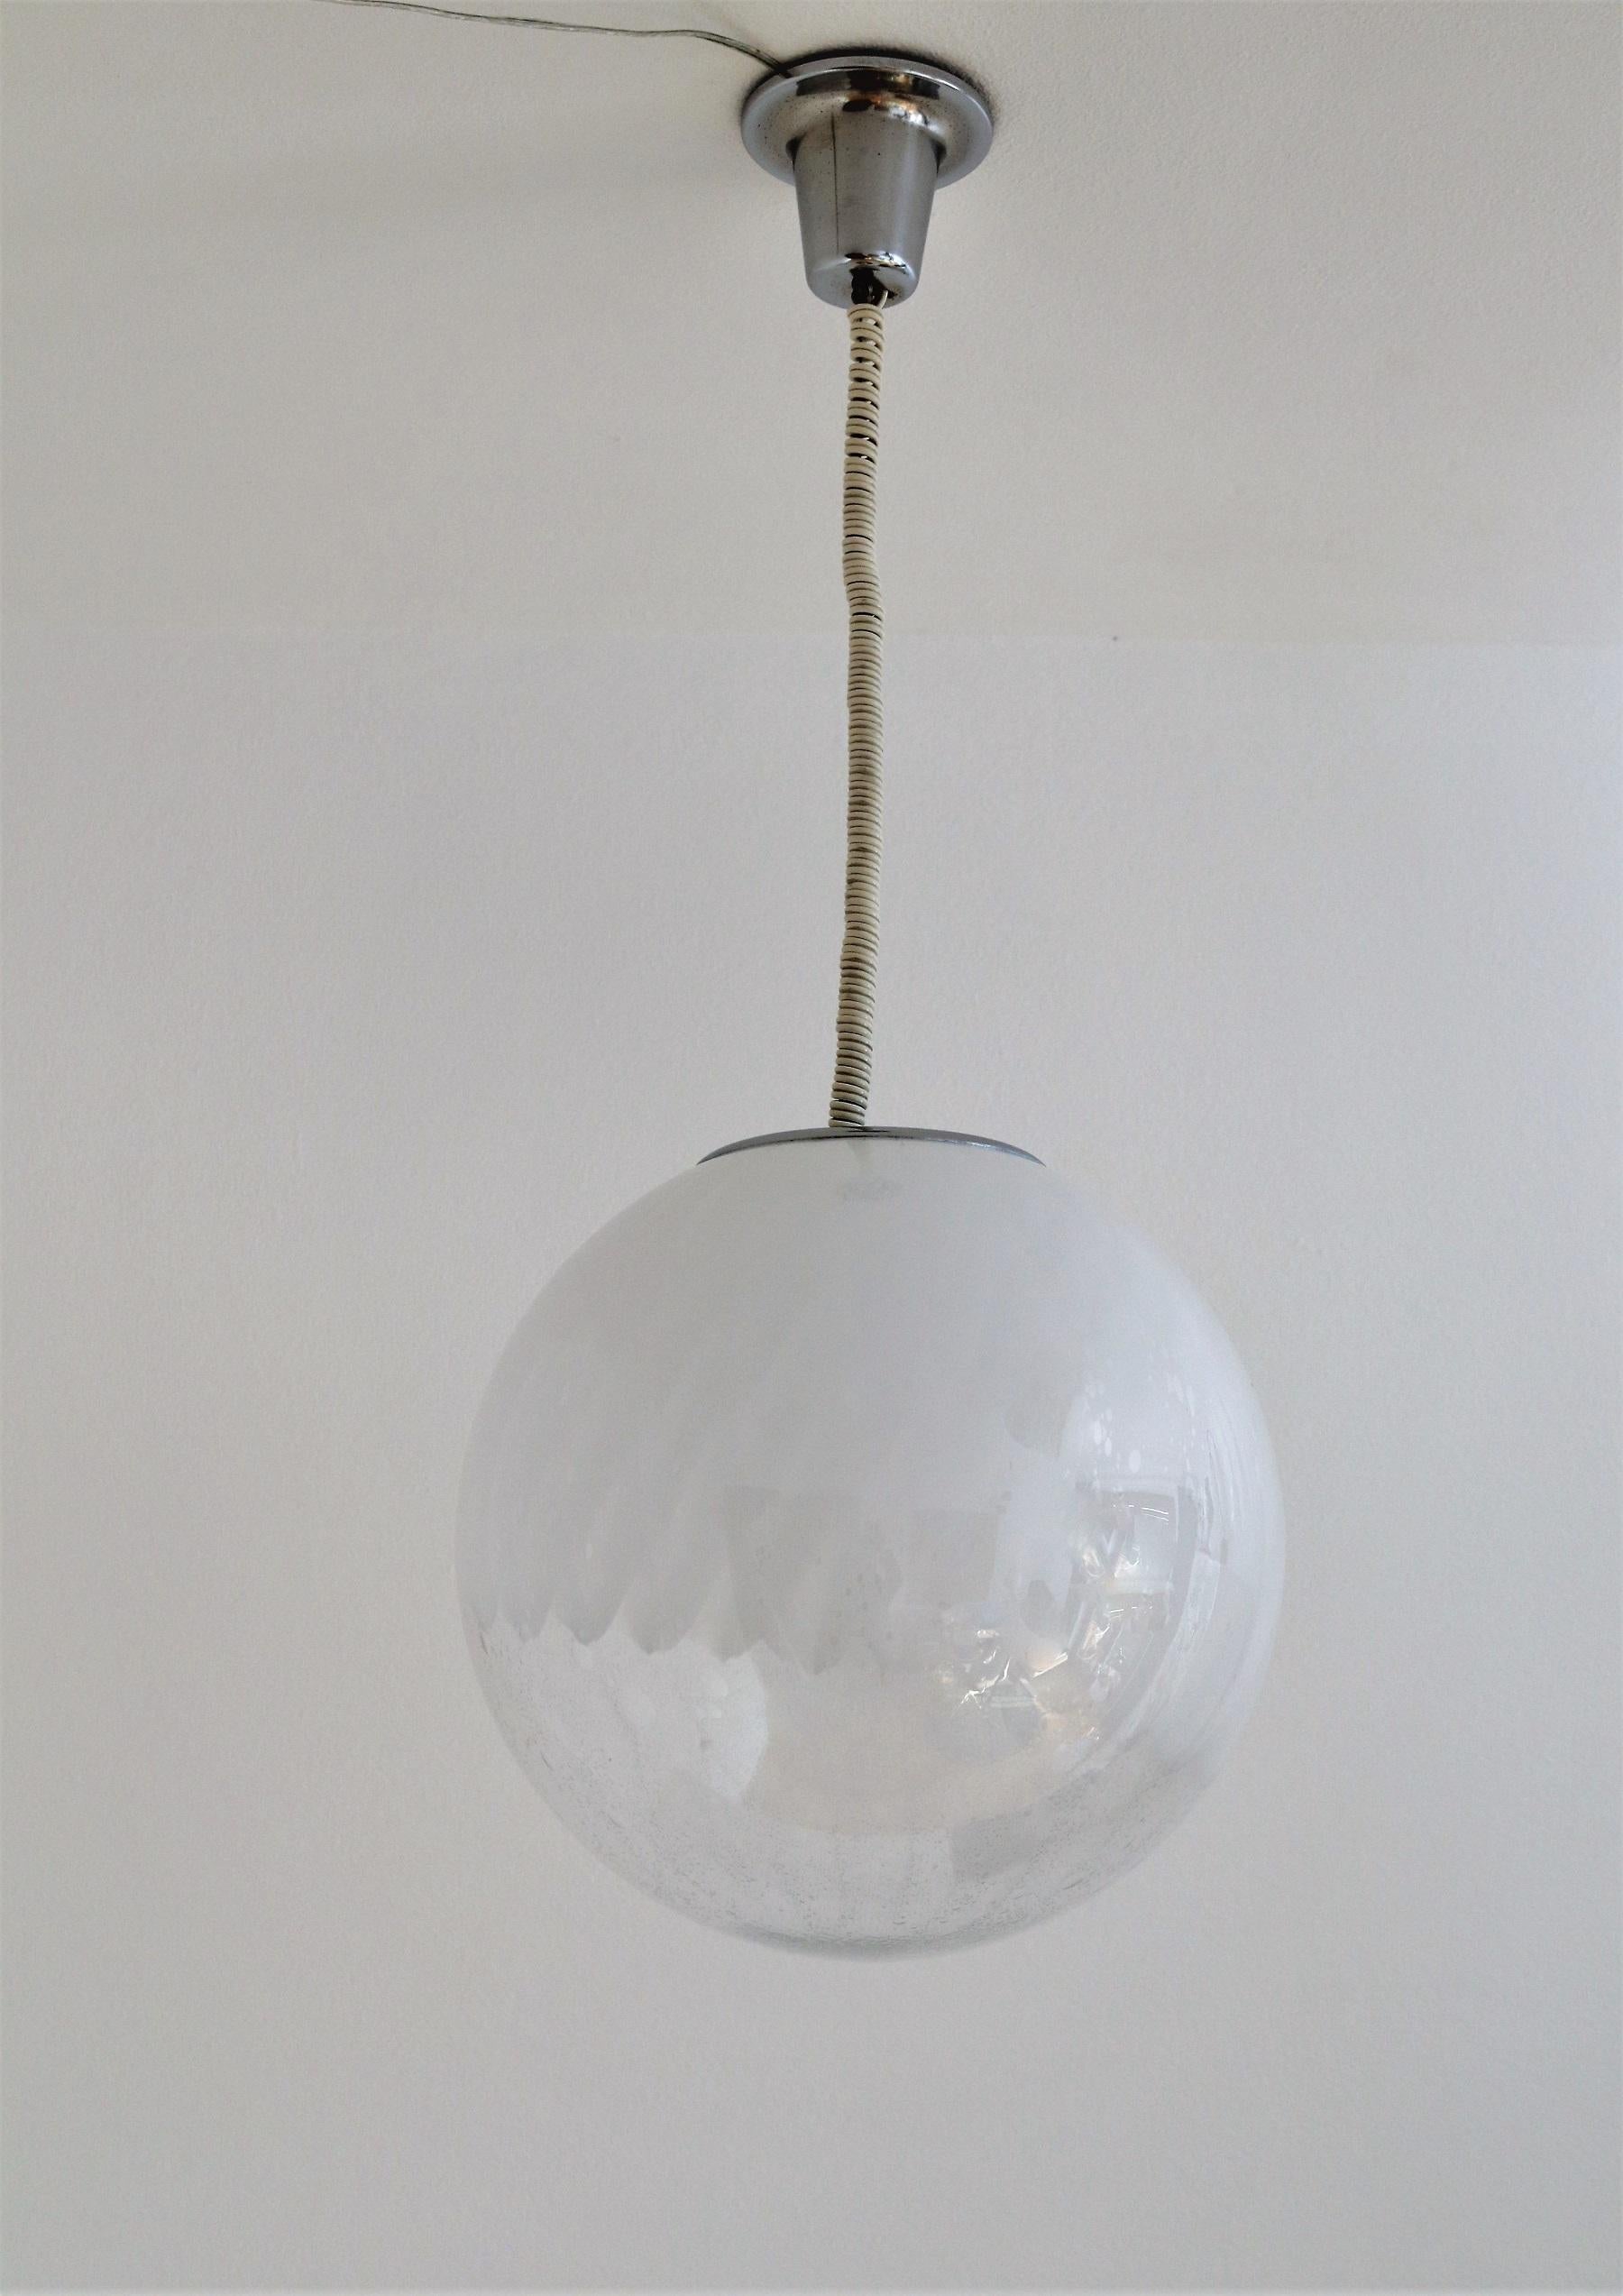 Beautiful and elegant Murano glass globe pendant lamp with gorgeous glass design, chrome details and original curly cable. The curly cable can be exchanged on request to a modern steel cable and white wire.
Attributet to Venini, Made in Italy in the